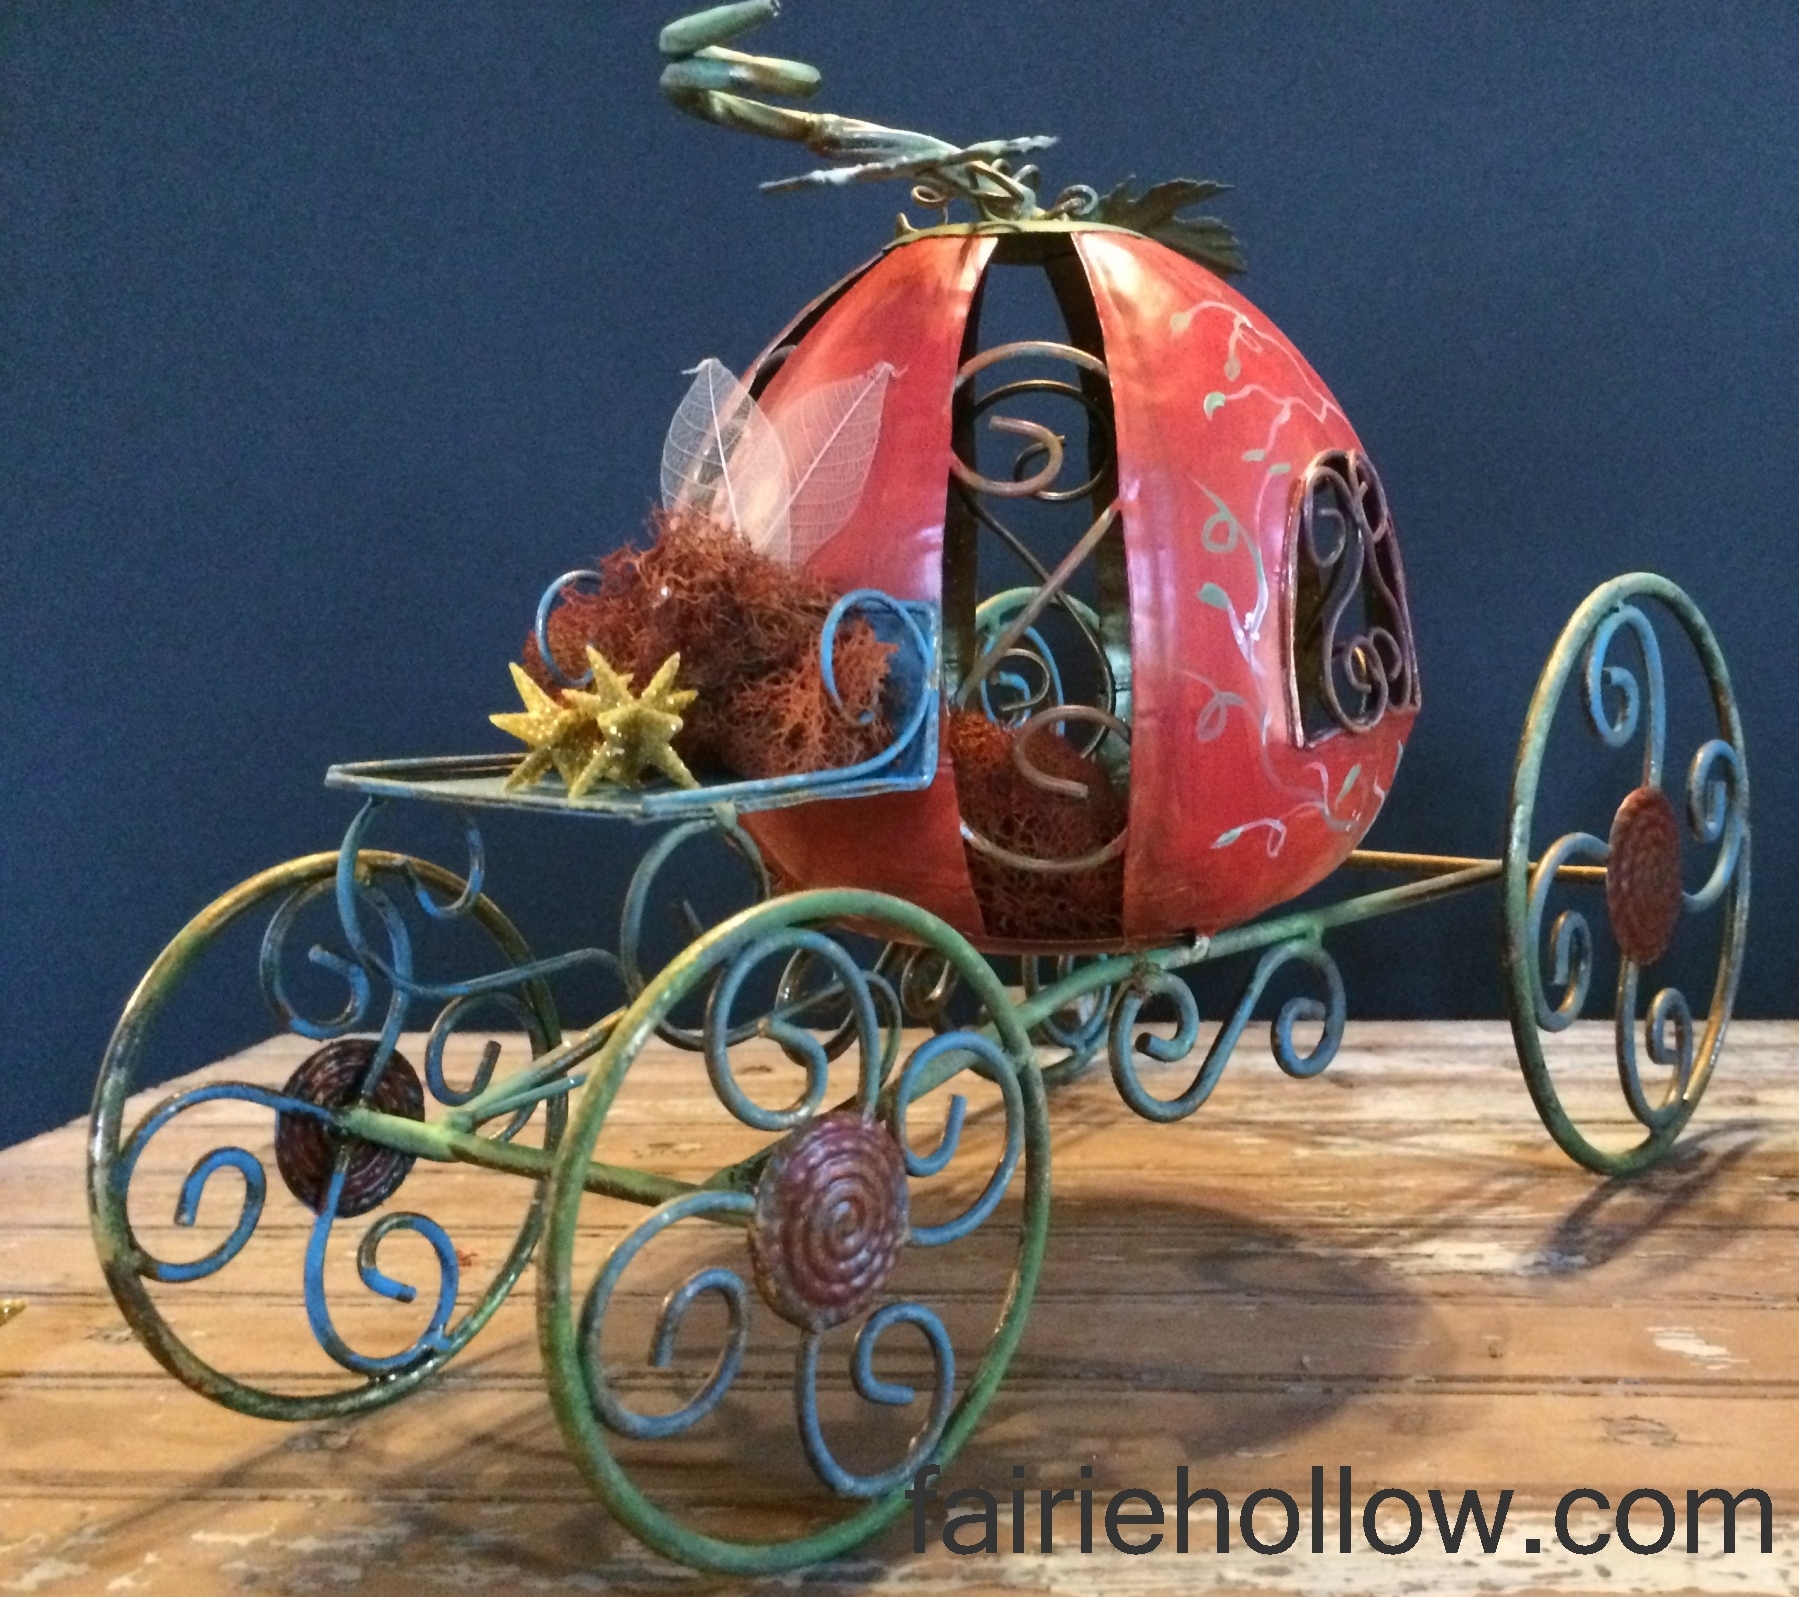 enchanted metal fairy pumpkin-carriage painted orange and green with vines